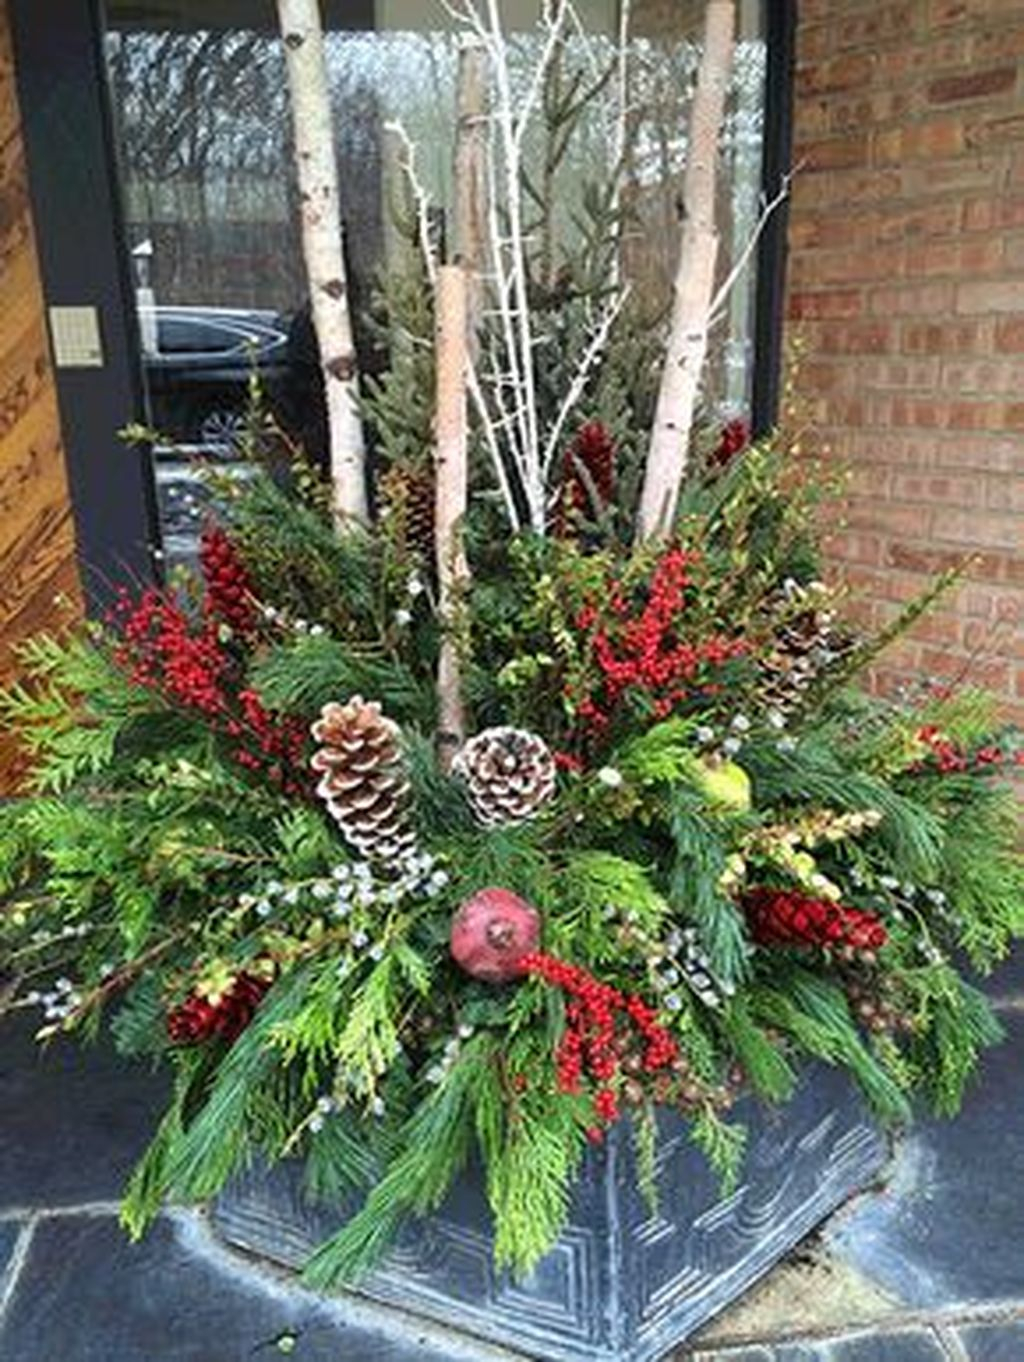 Marvelous Outdoor Holiday Planter Ideas To Beauty Porch Décor 07